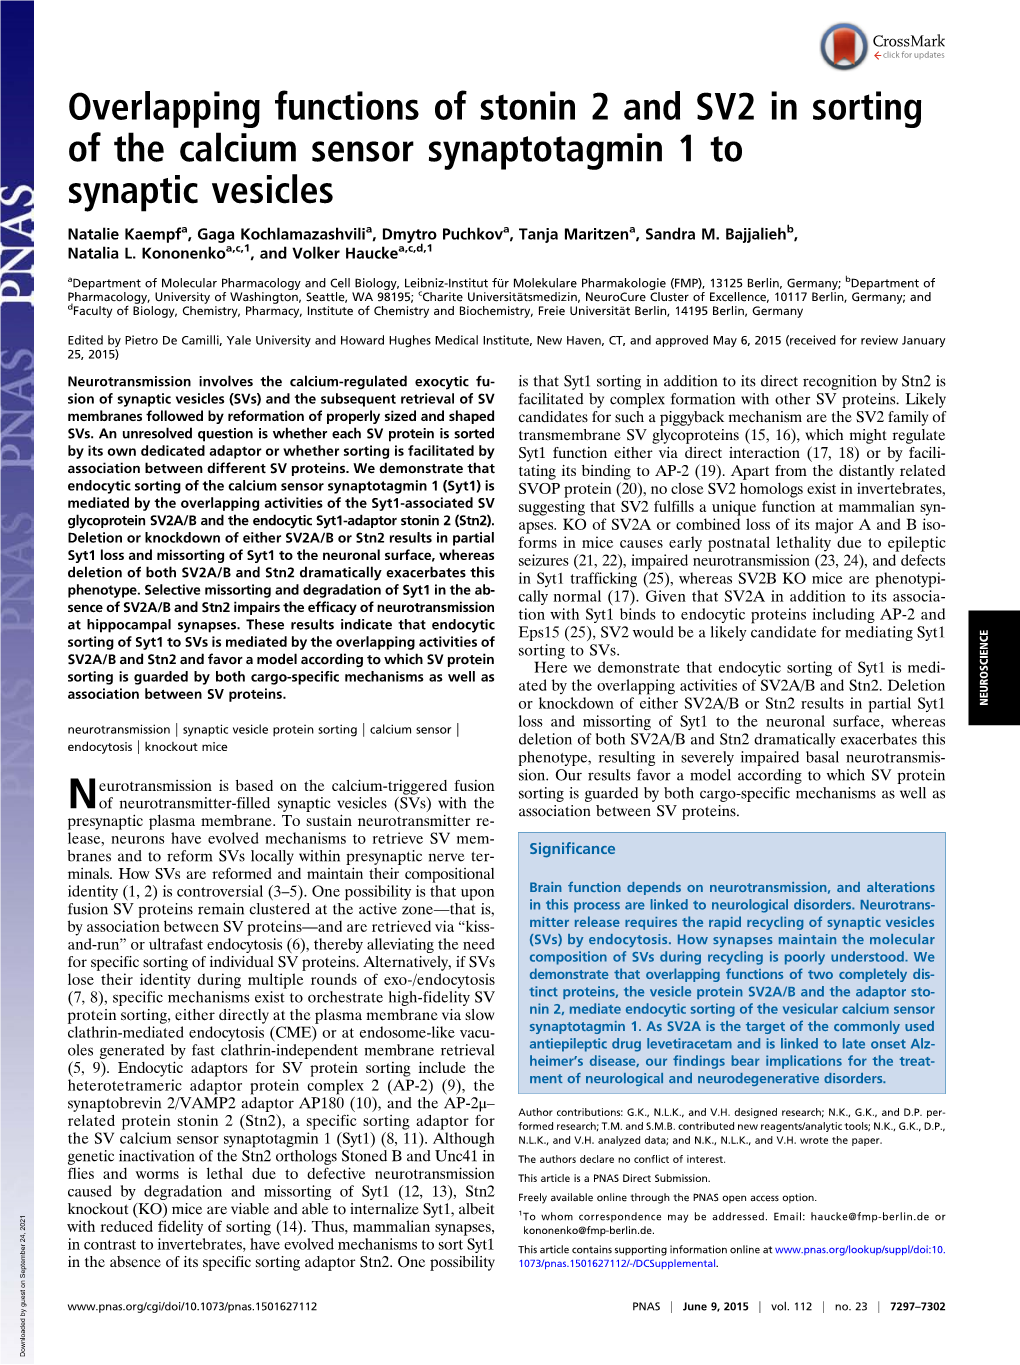 Overlapping Functions of Stonin 2 and SV2 in Sorting of the Calcium Sensor Synaptotagmin 1 to Synaptic Vesicles